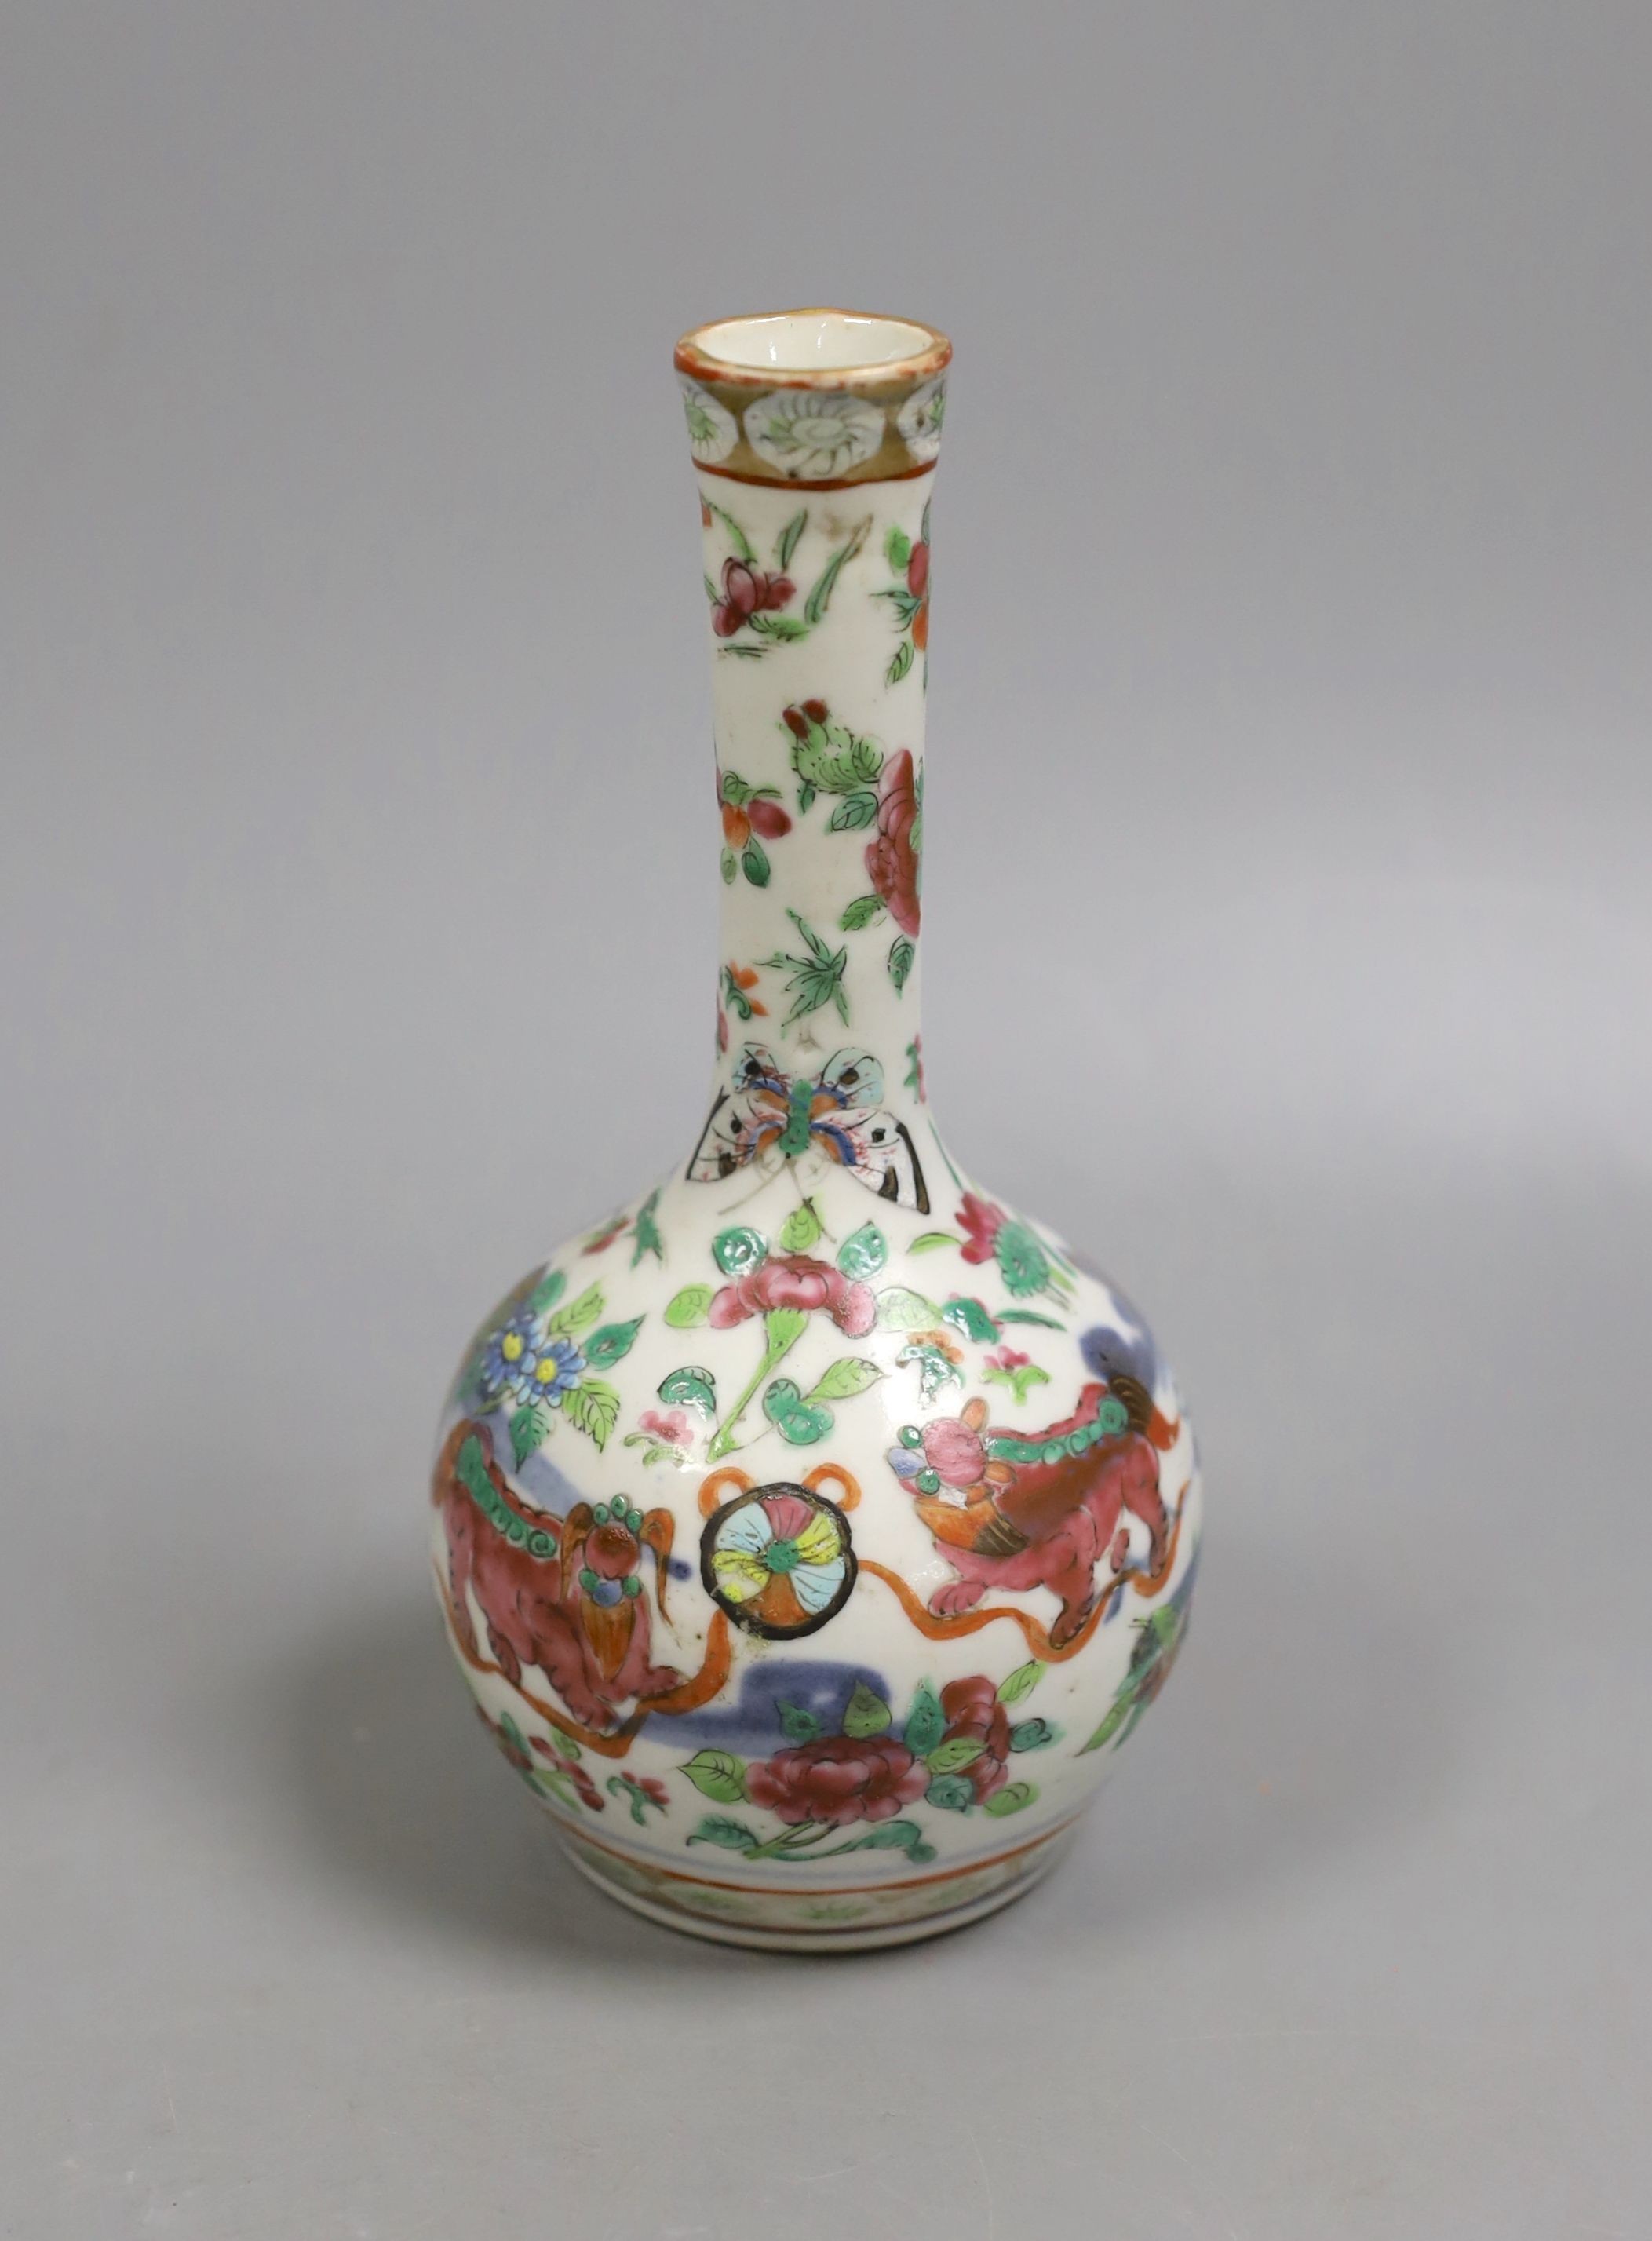 A 19th century Chinese famille rose bottle vase (dogs of fo), 17 cms high.